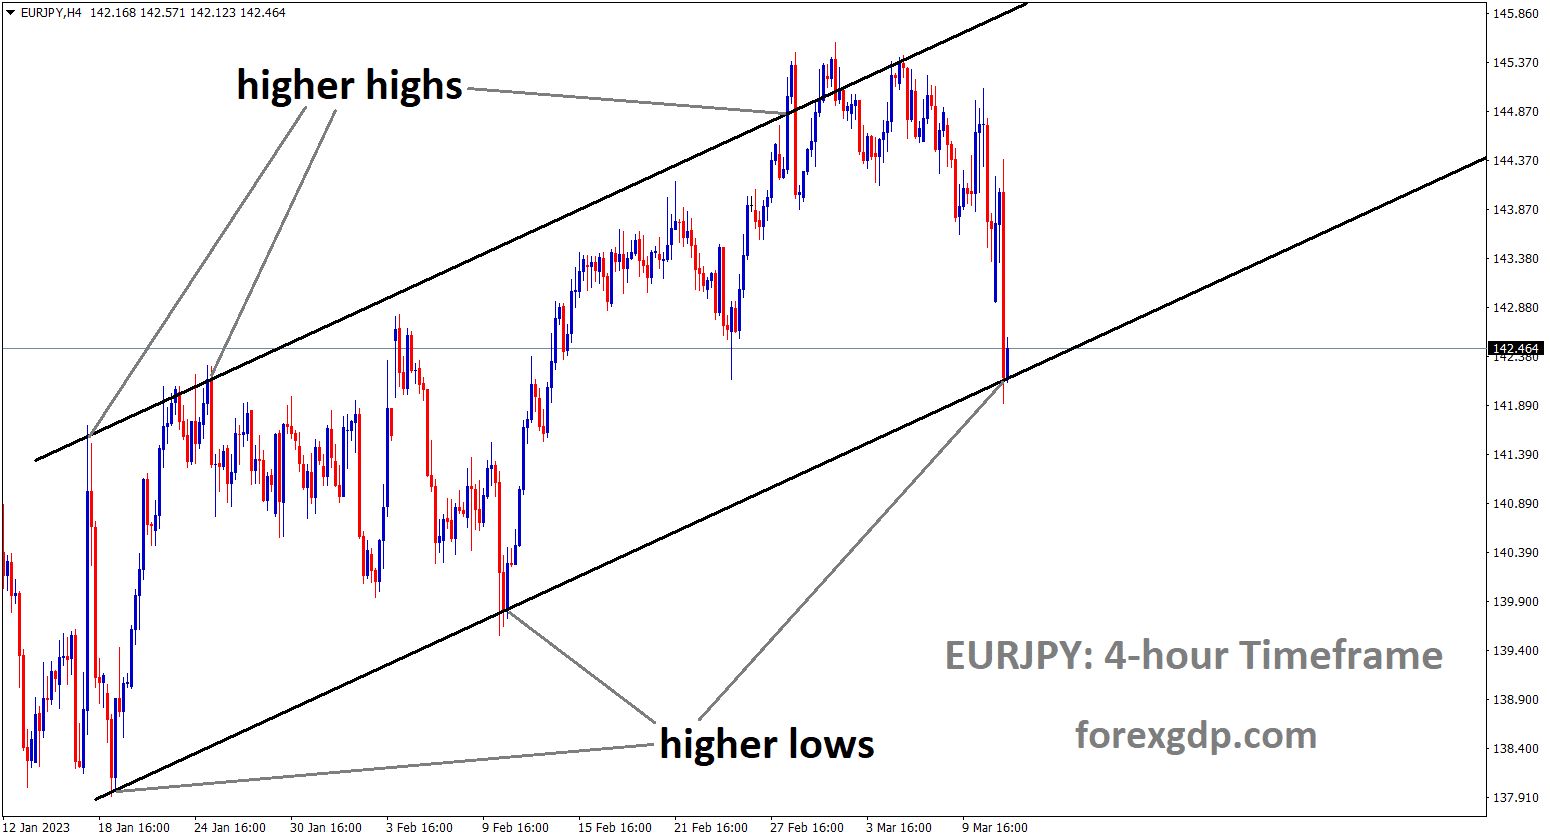 EURJPY is moving in Ascending channel and the market has reached the higher low area of the channel.